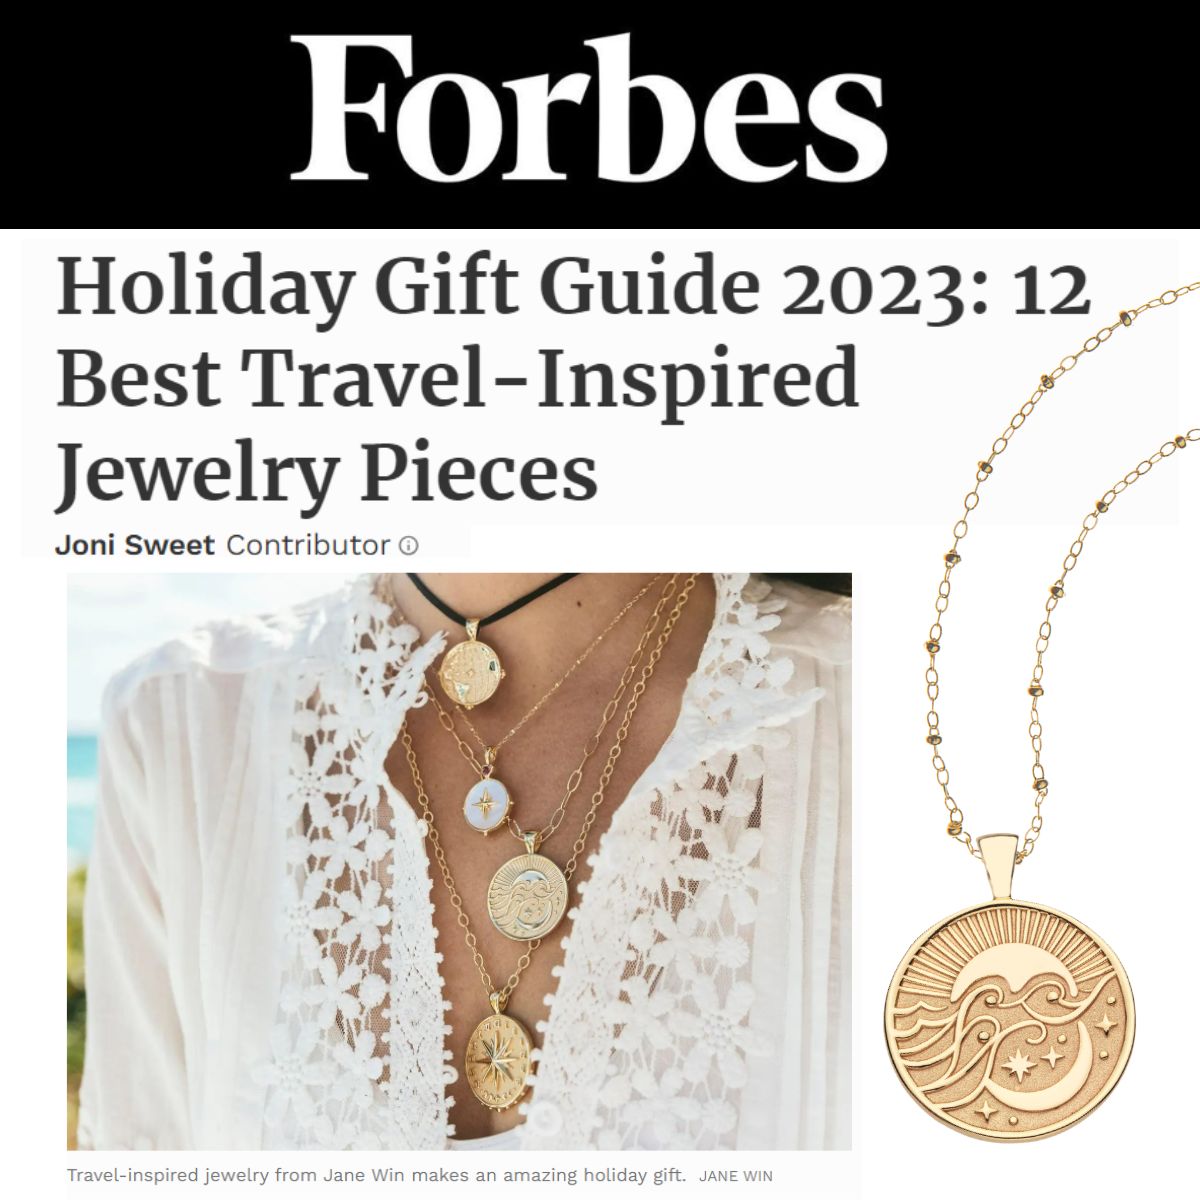 Press Highlight: Forbes Holiday Gift Guide 2023: 12 Best Travel-Inspired Jewelry Pieces